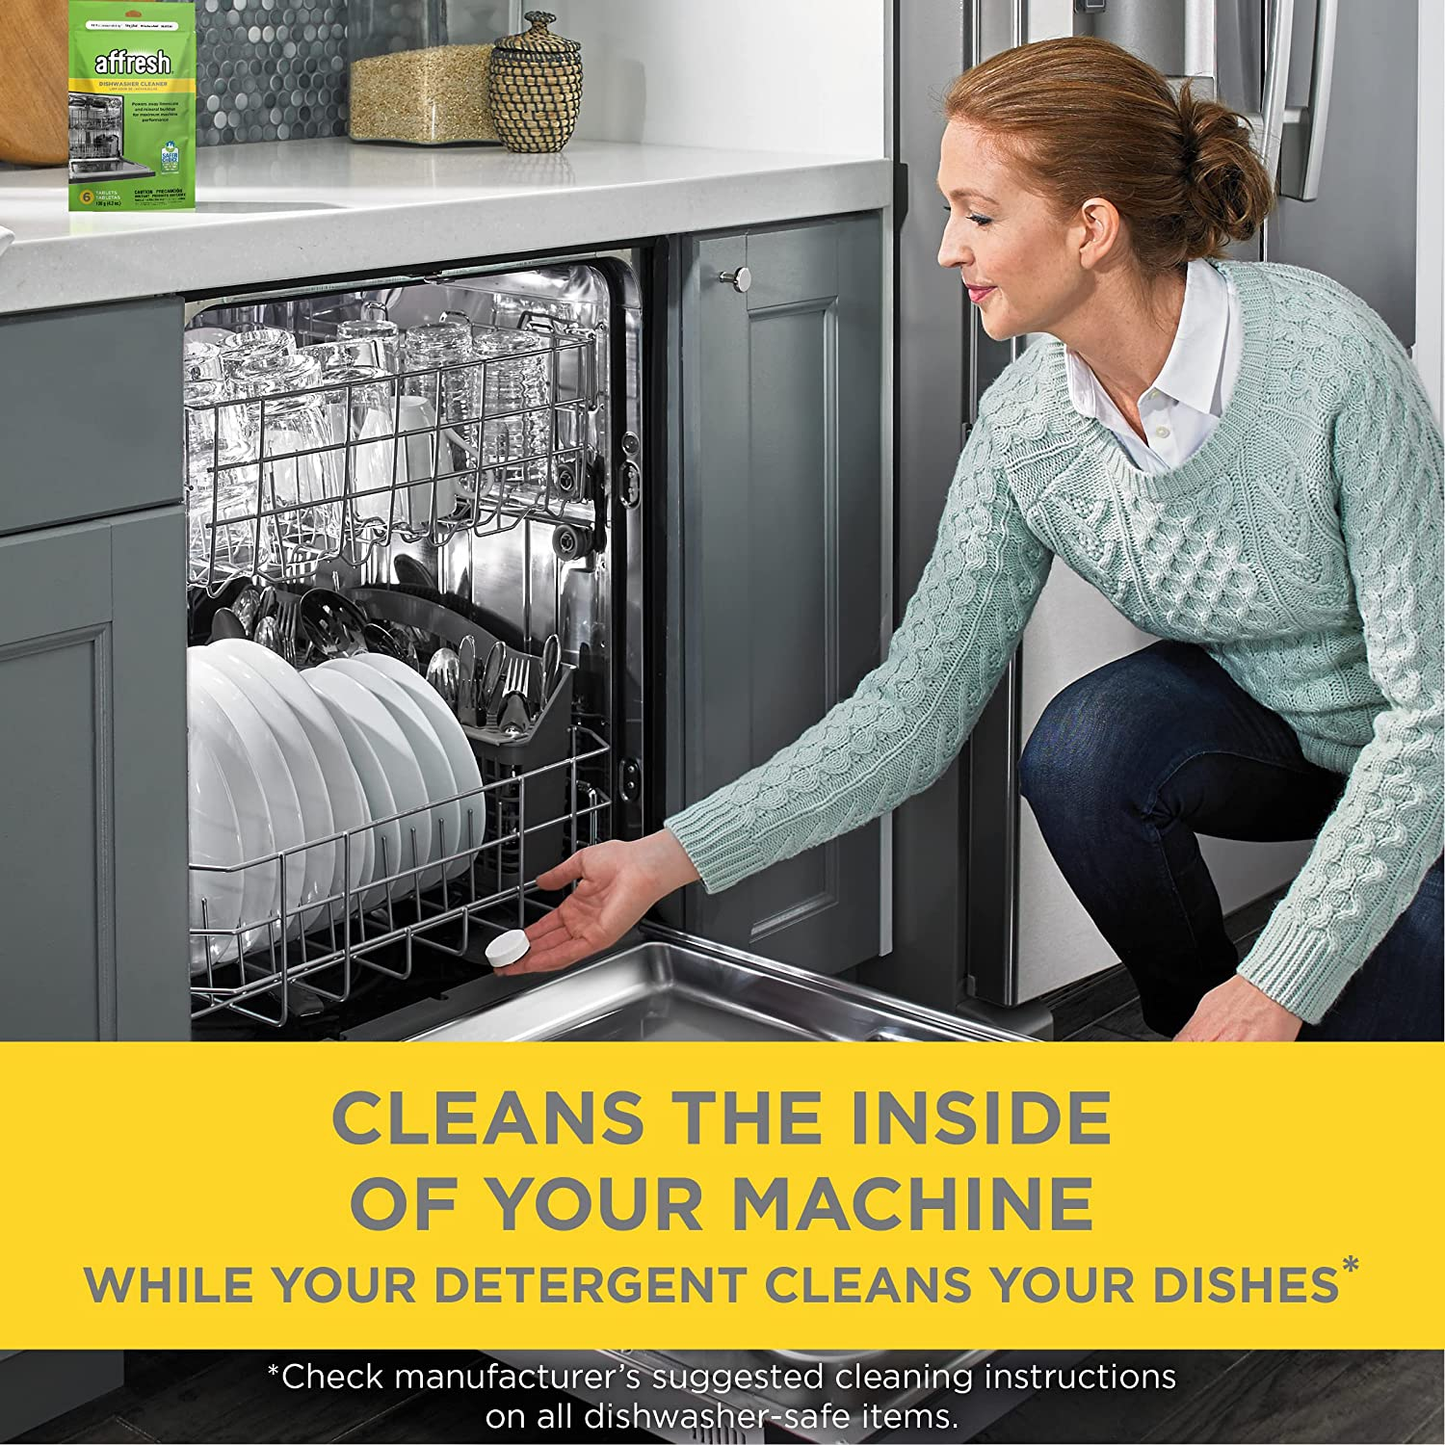 Dishwasher Cleaner, Helps Remove Limescale and Odor-Causing Residue, 6 Tablets